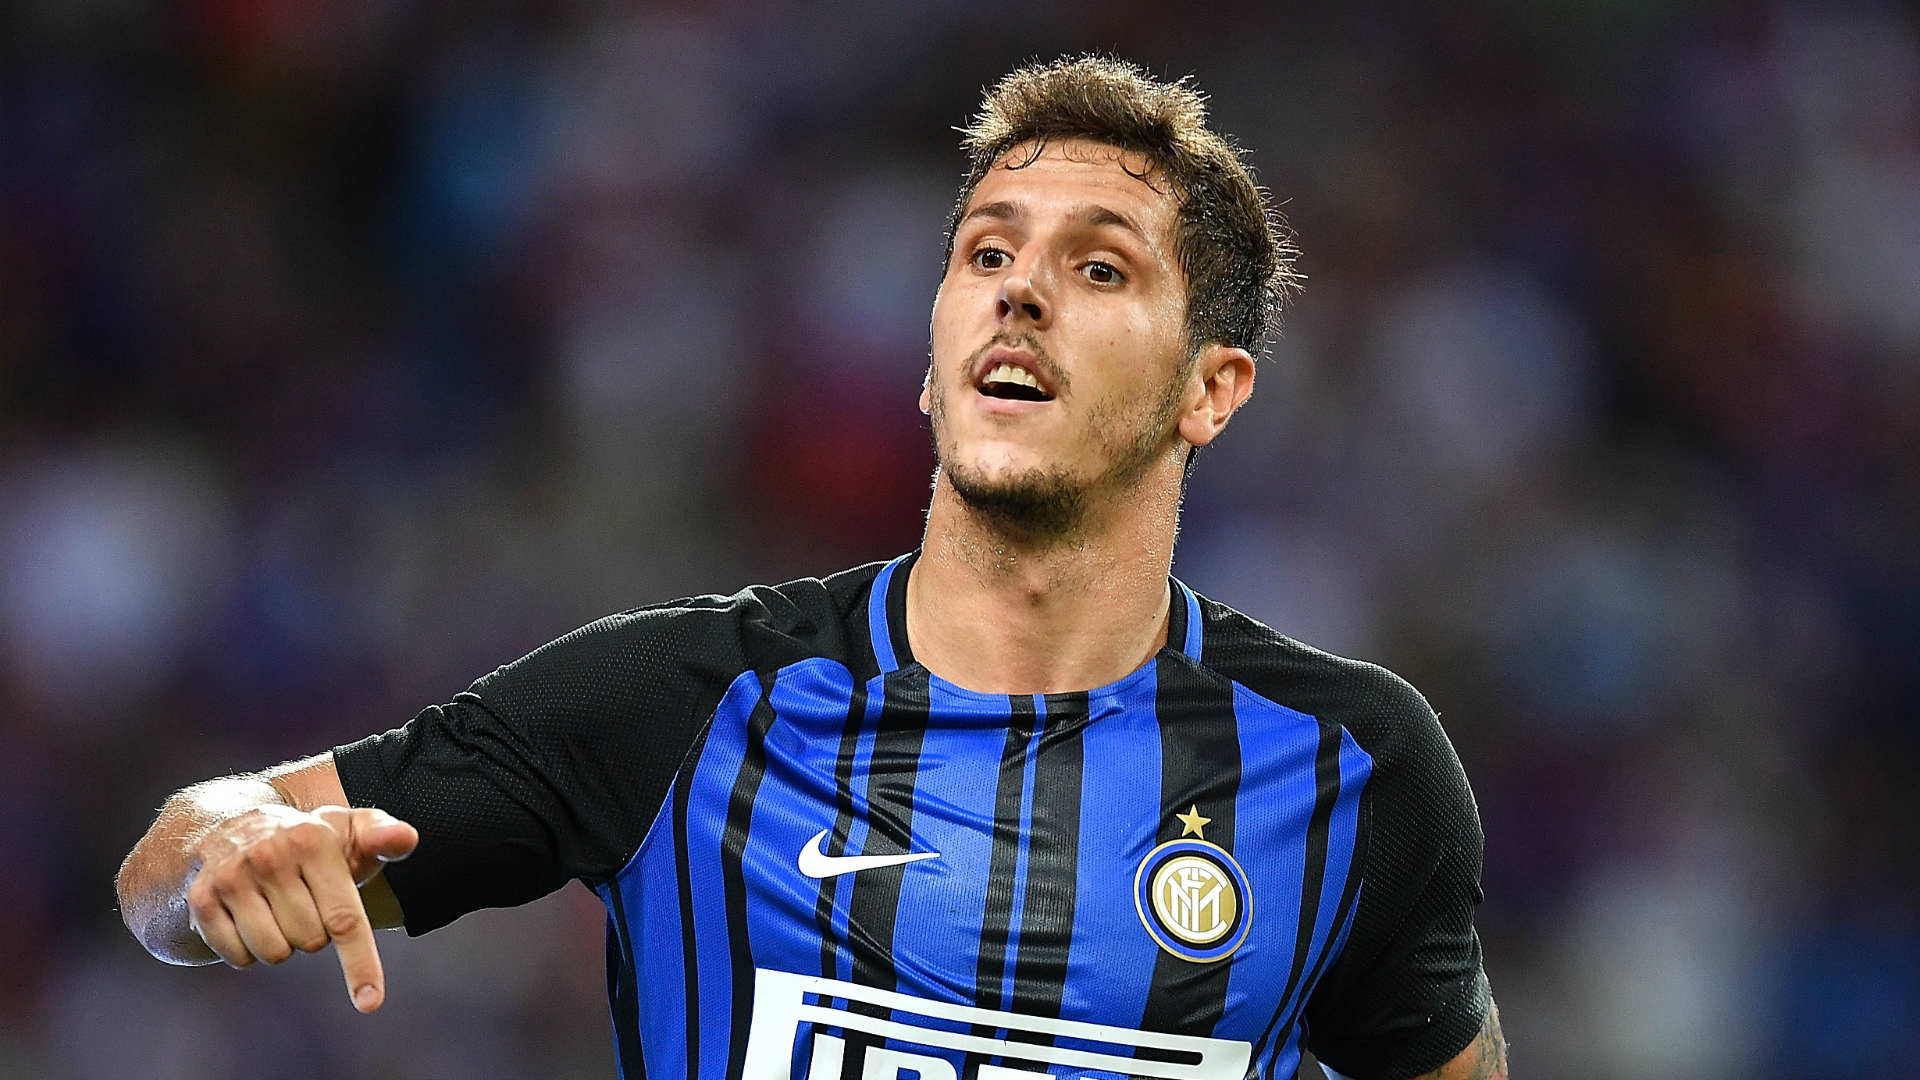 Inter's Jovetic to take Mbappe's number 10 shirt at Monaco